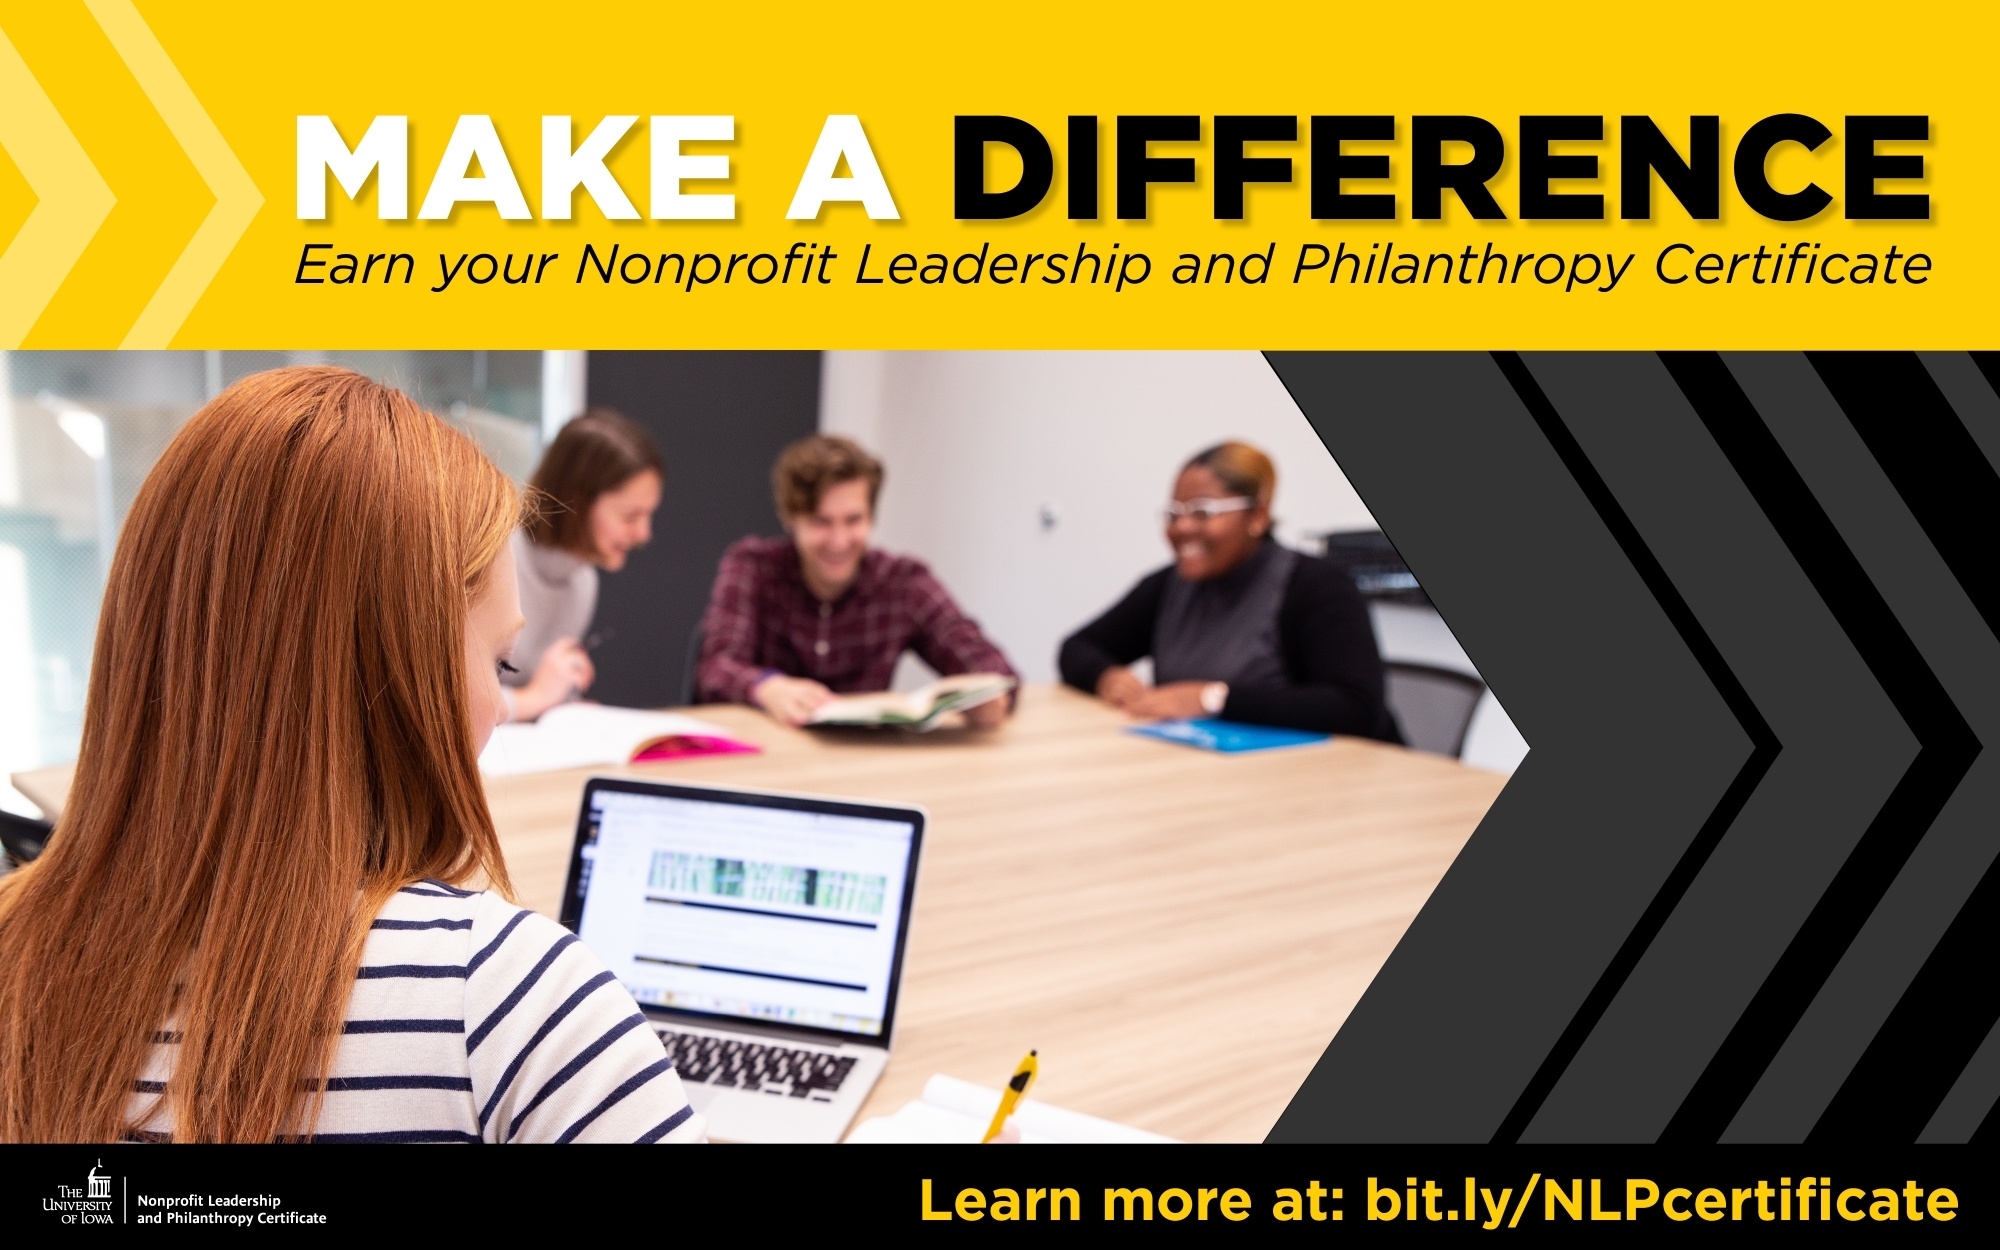 Make a Difference. Earn your Nonprofit Leadership and Philanthropy Certificate. Learn more at: bit.ly/NLPcertificate